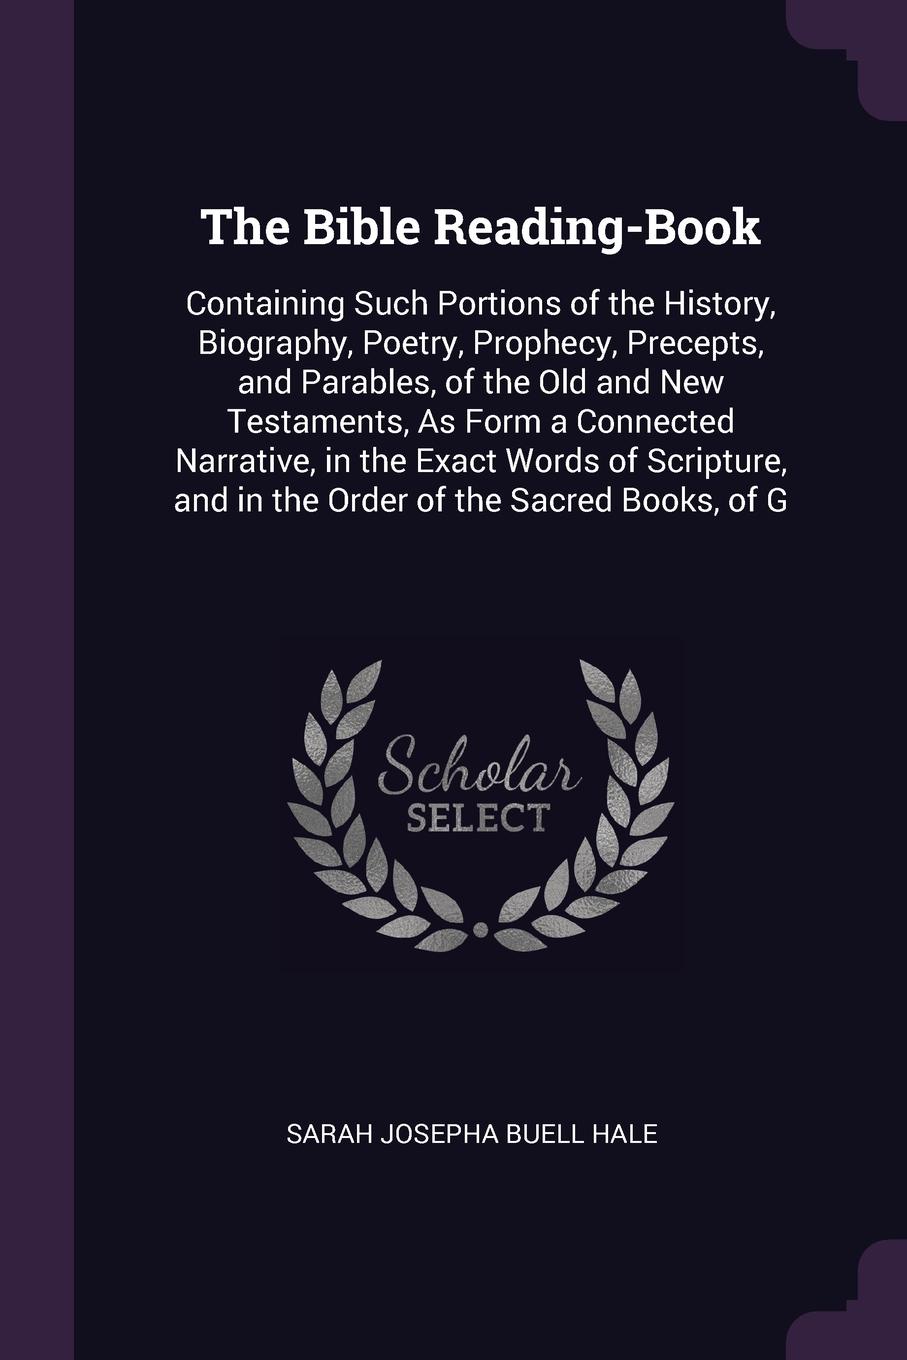 The Bible Reading-Book. Containing Such Portions of the History, Biography, Poetry, Prophecy, Precepts, and Parables, of the Old and New Testaments, As Form a Connected Narrative, in the Exact Words of Scripture, and in the Order of the Sacred Boo...